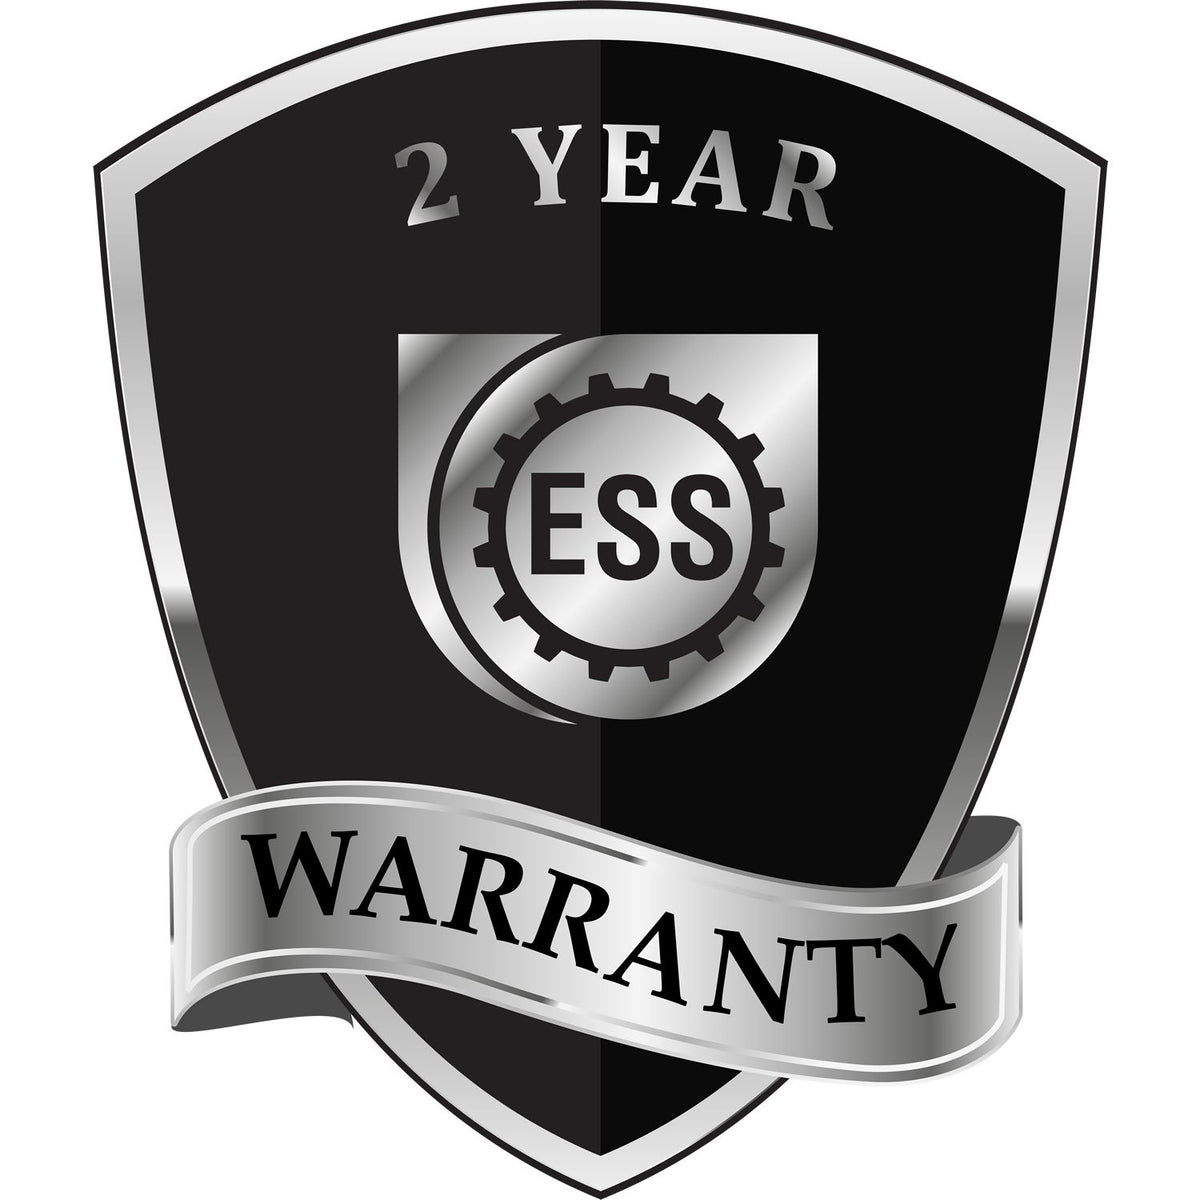 A black and silver badge or emblem showing warranty information for the State of Kansas Extended Long Reach Geologist Seal